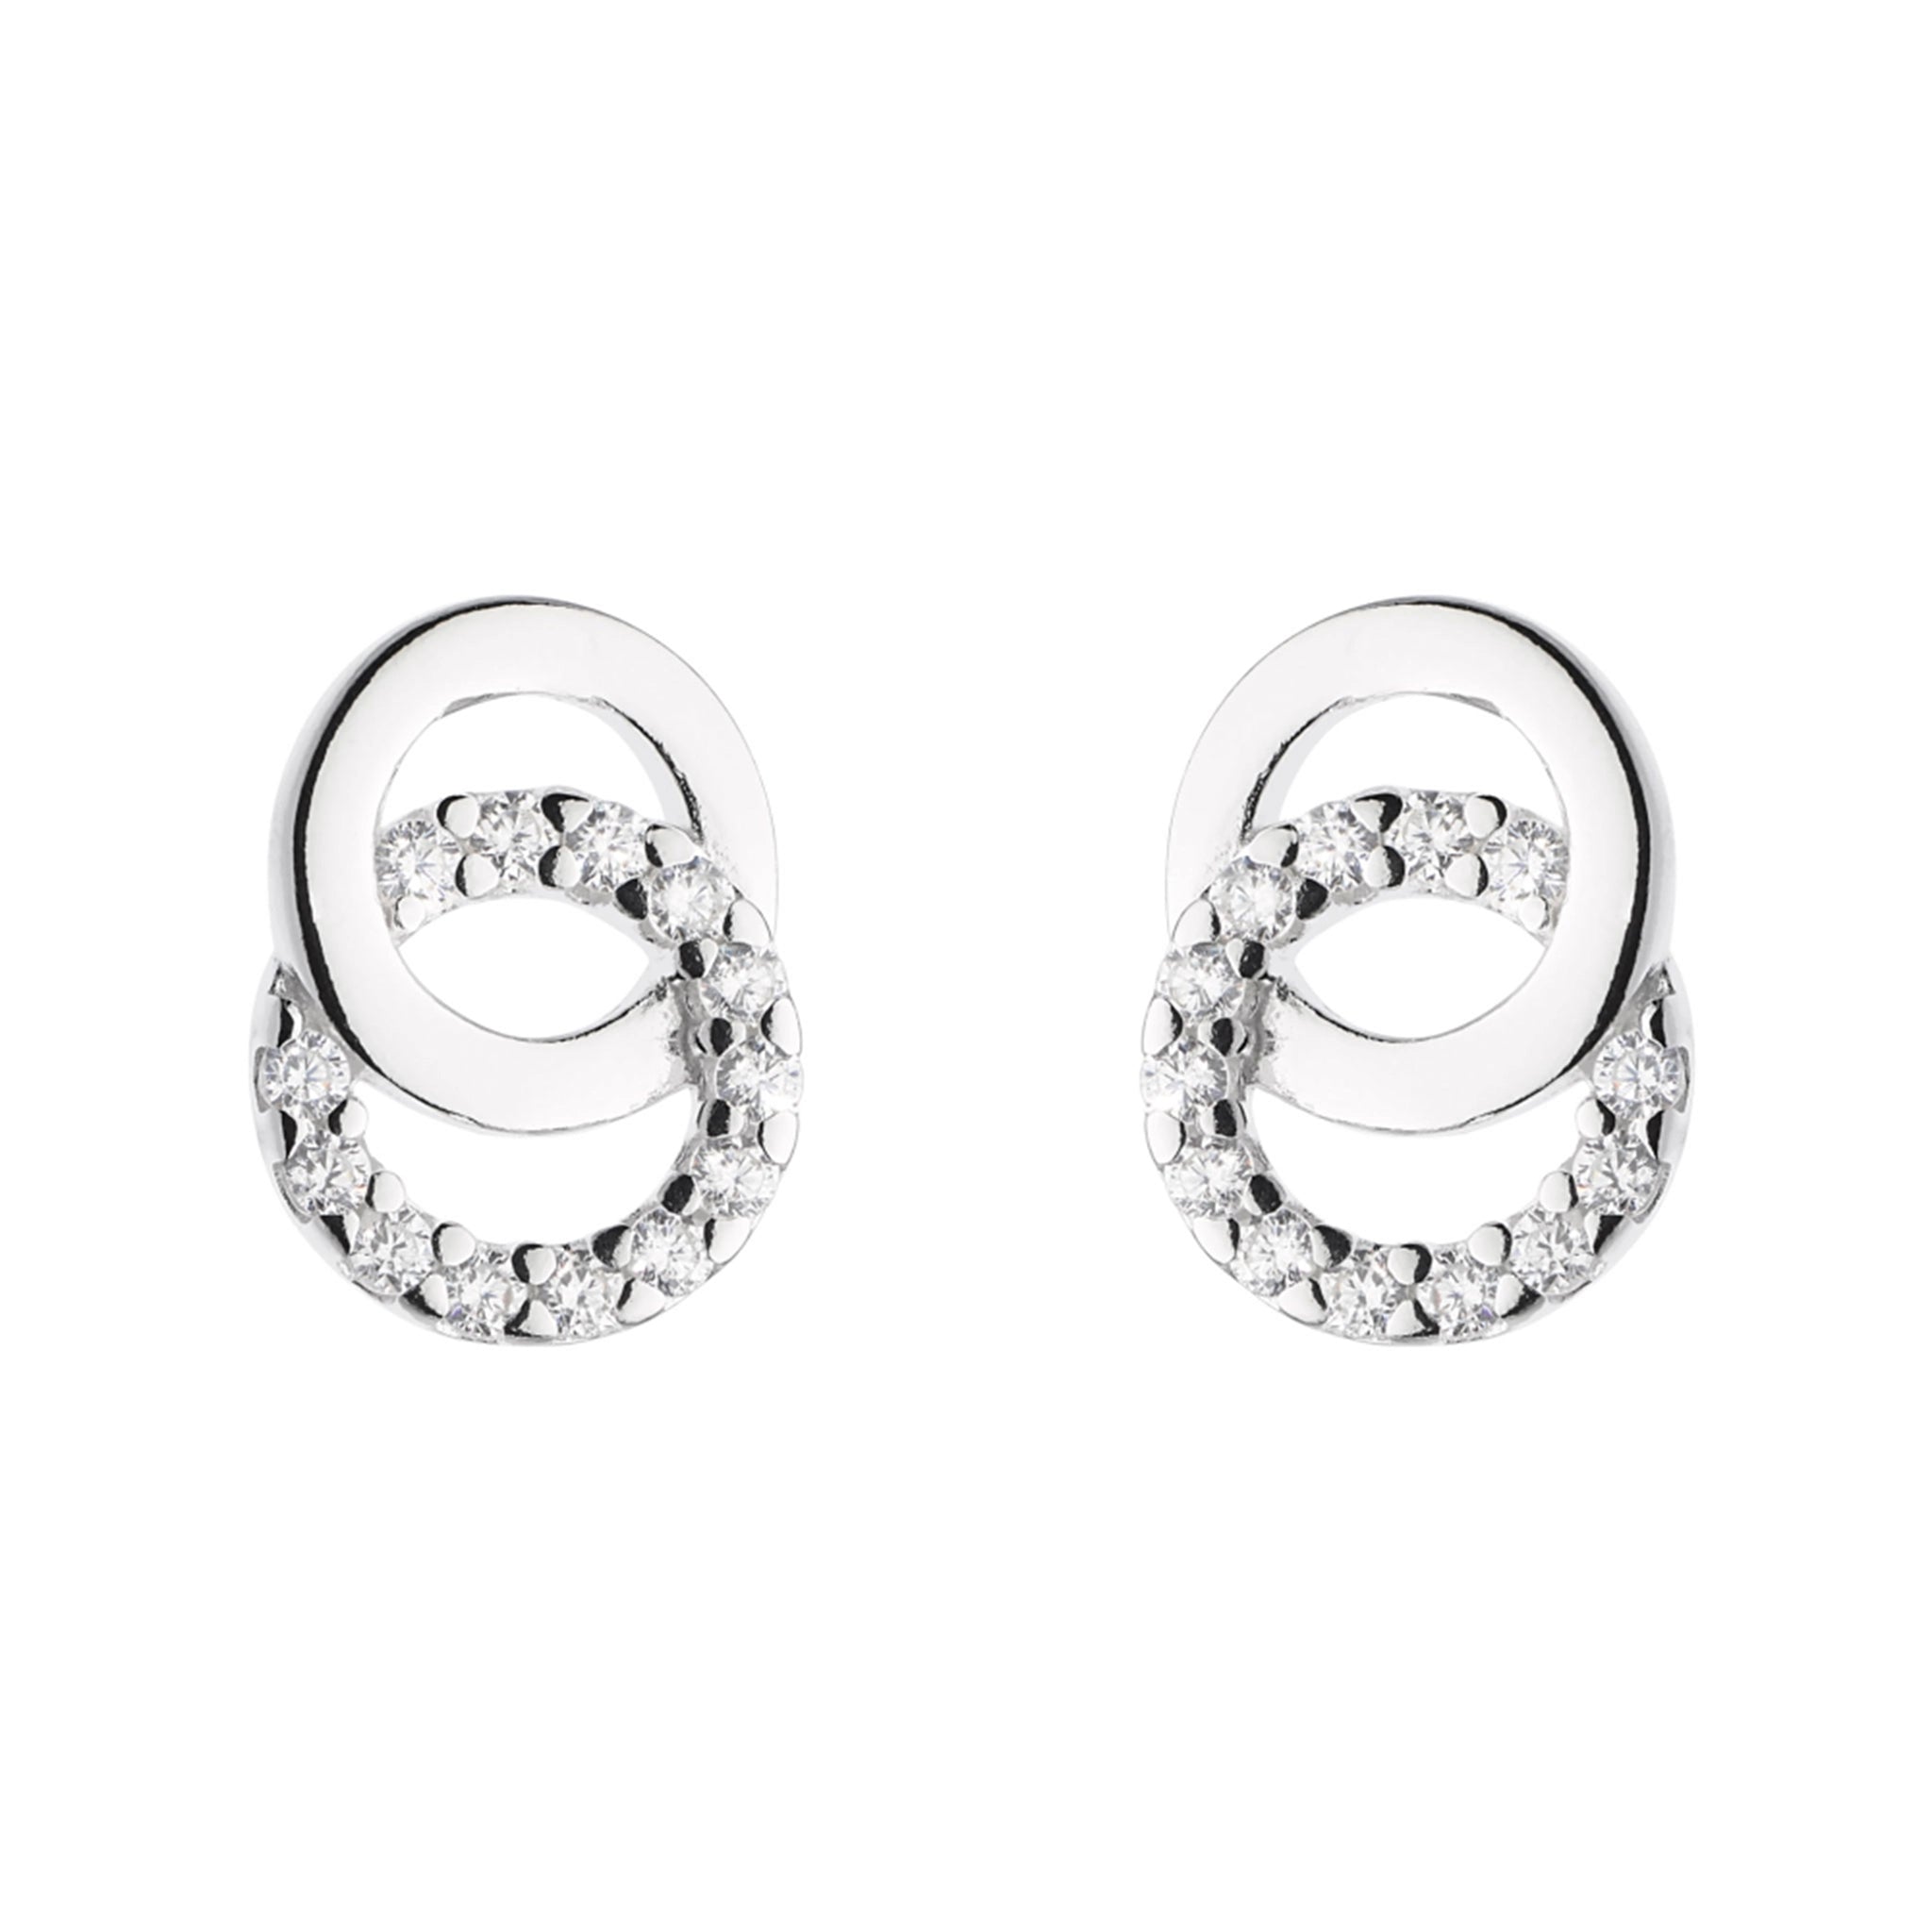 Stud earrings with two linked open circles in polished silver and CZ stones